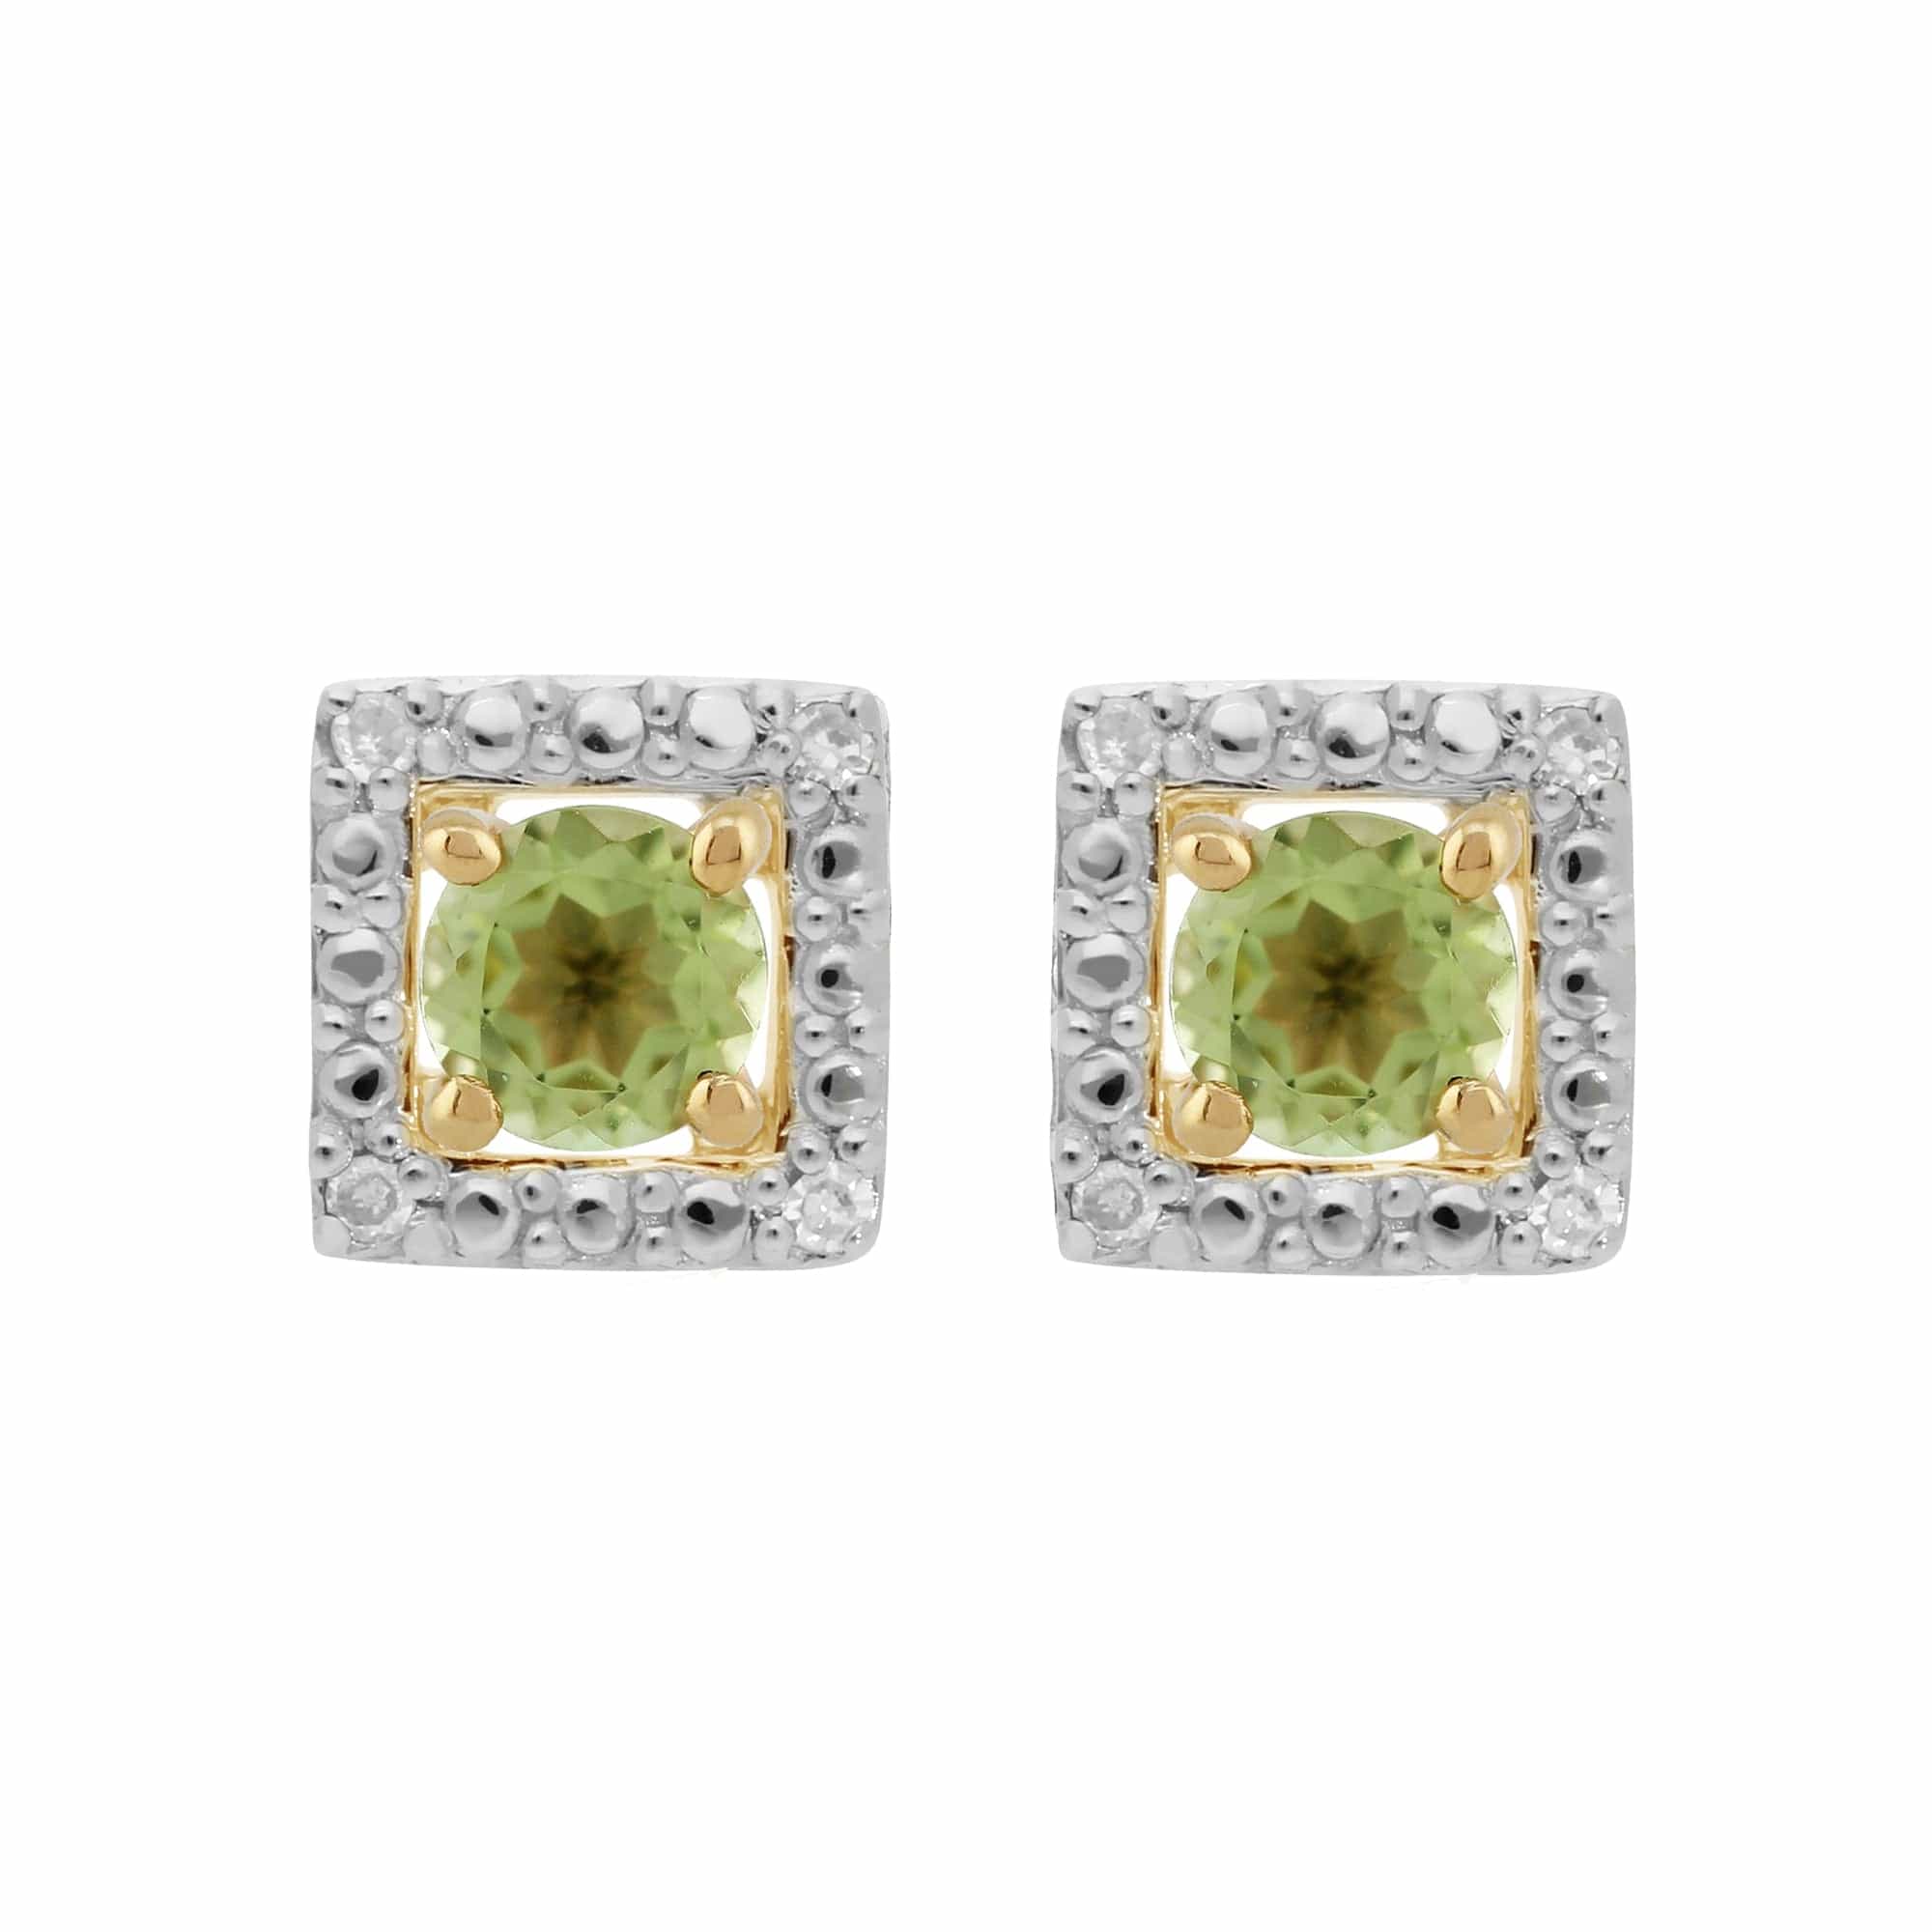 11562-191E0379019 Classic Round Peridot Stud Earrings with Detachable Diamond Square Earrings Jacket Set in 9ct Yellow Gold 1